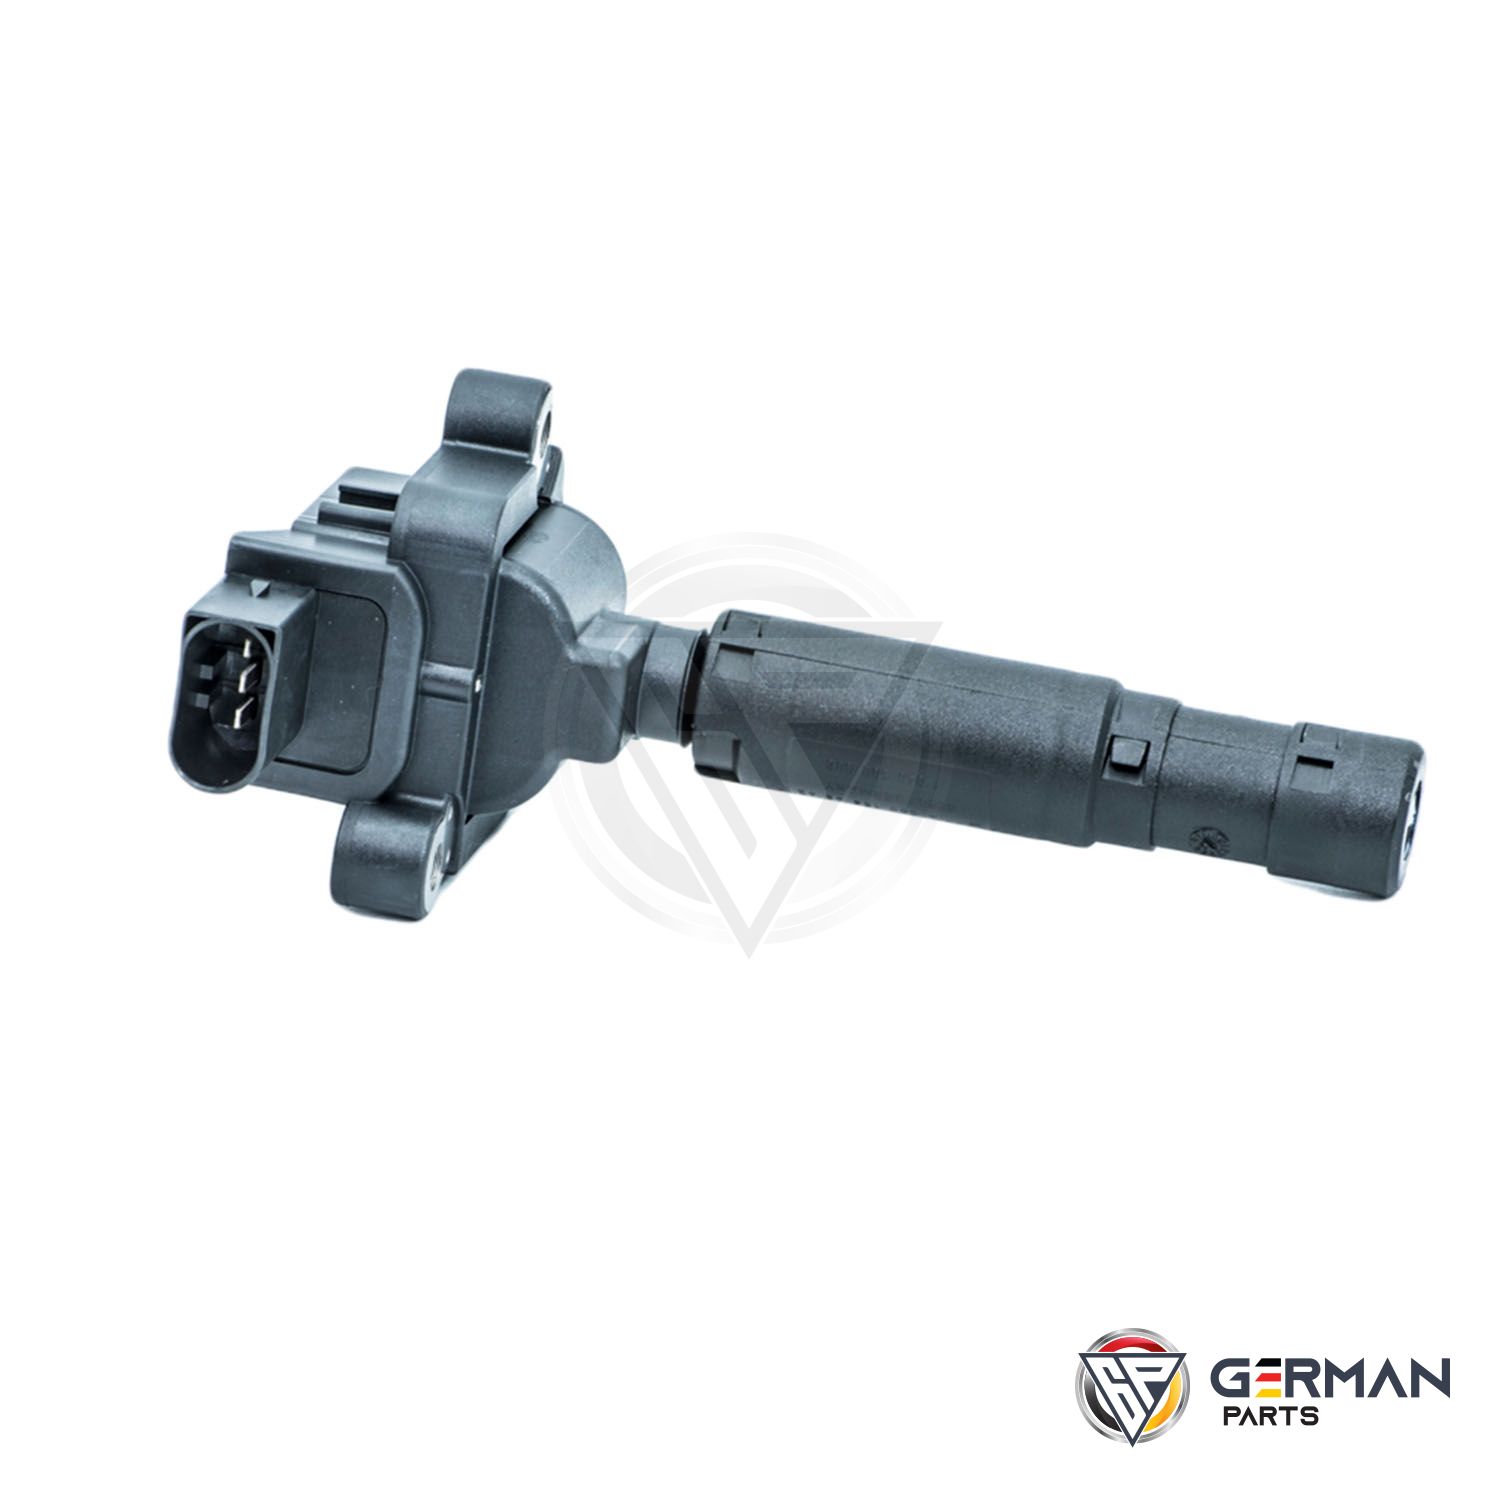 Buy Mercedes Benz Ignition Coil 0001502980 - German Parts